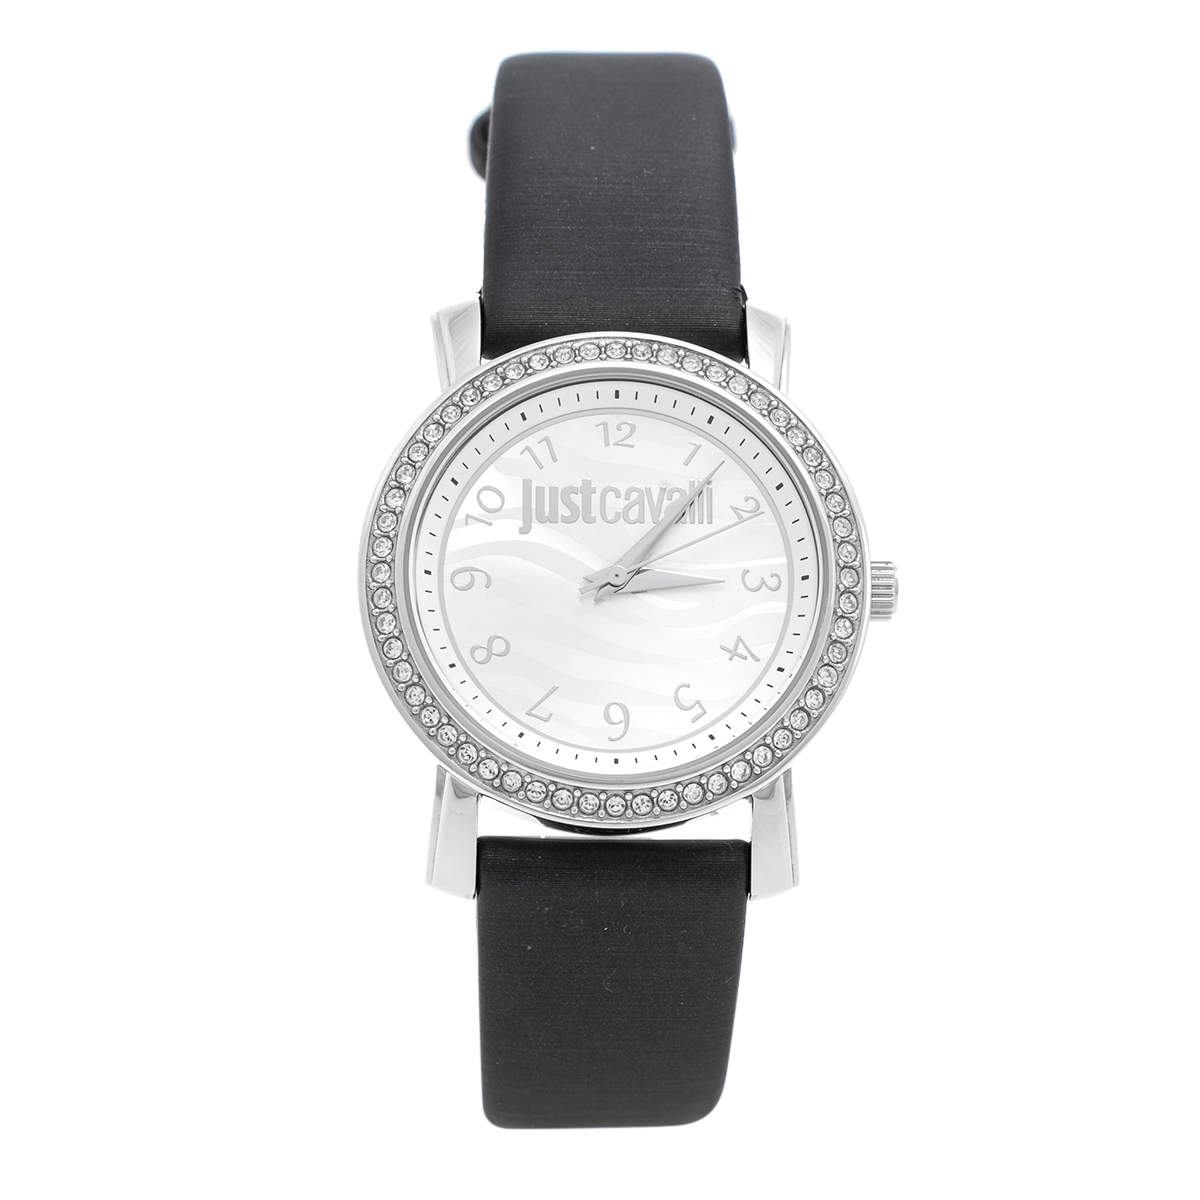 Just Cavalli Silver Stainless Steel Leather Moon 3H R7251103501 Women's Wristwatch 38 mm